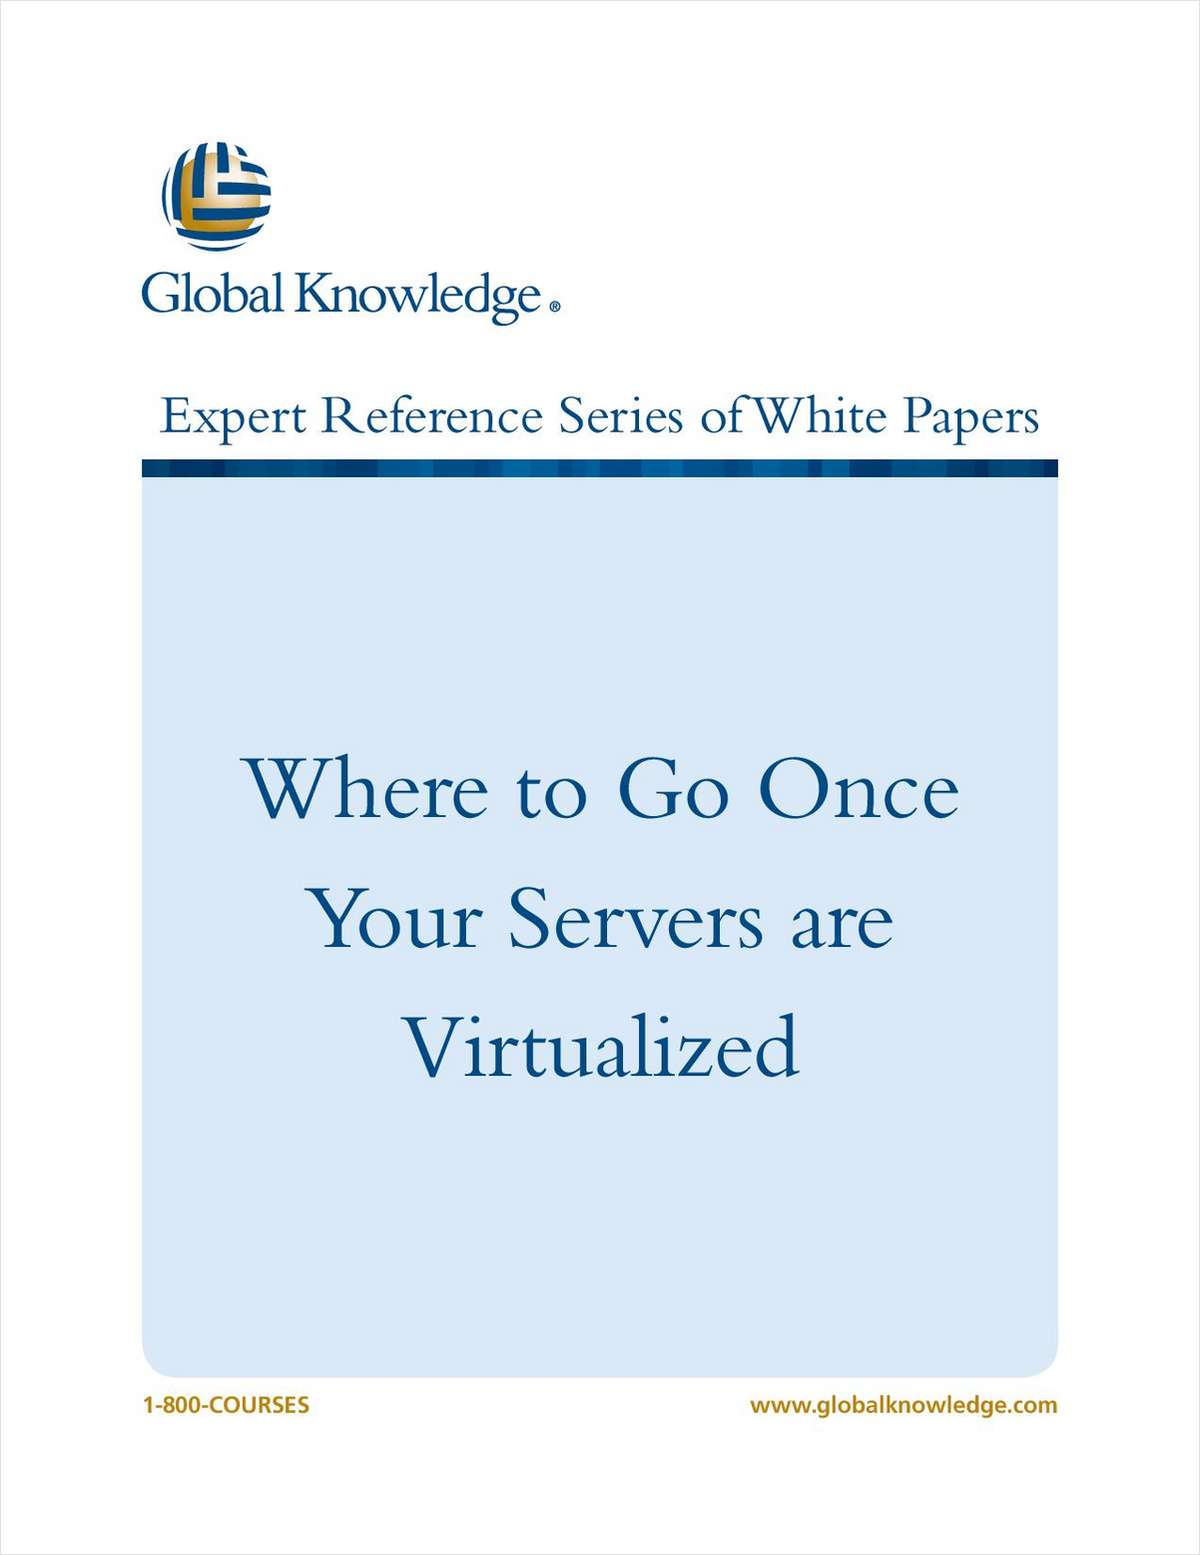 Where to Go Once Your Servers Are Virtualized